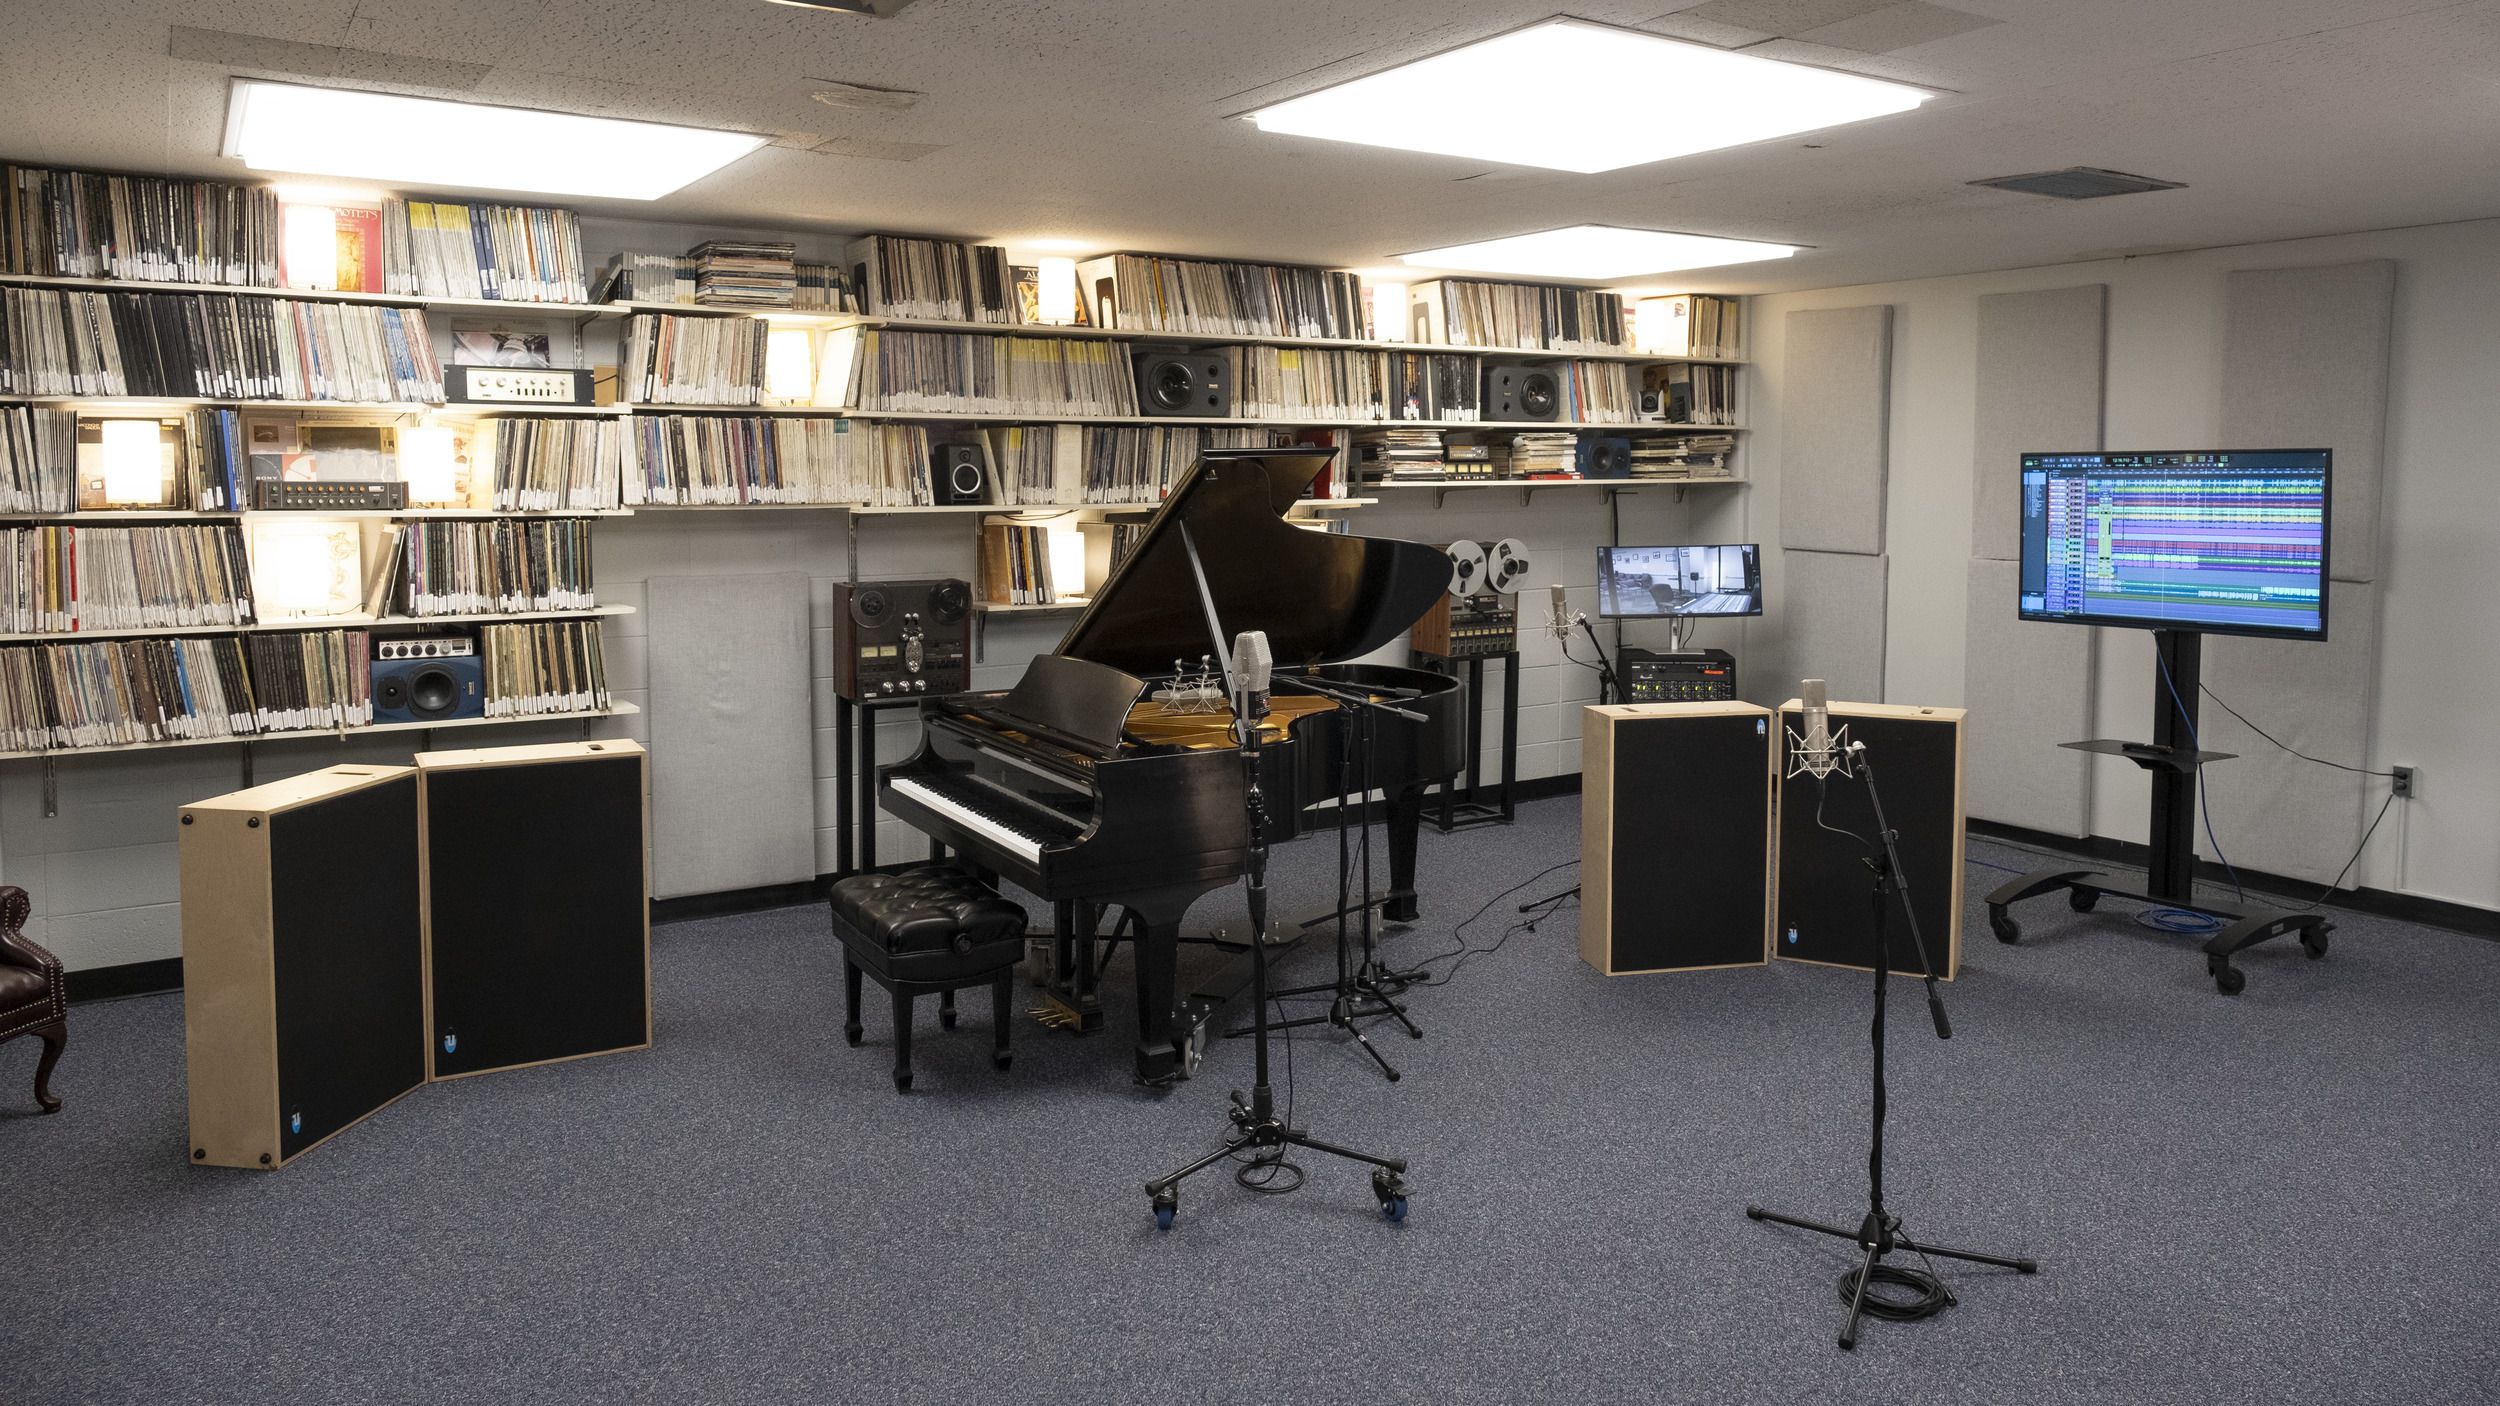 Recording studio set up for piano and mics